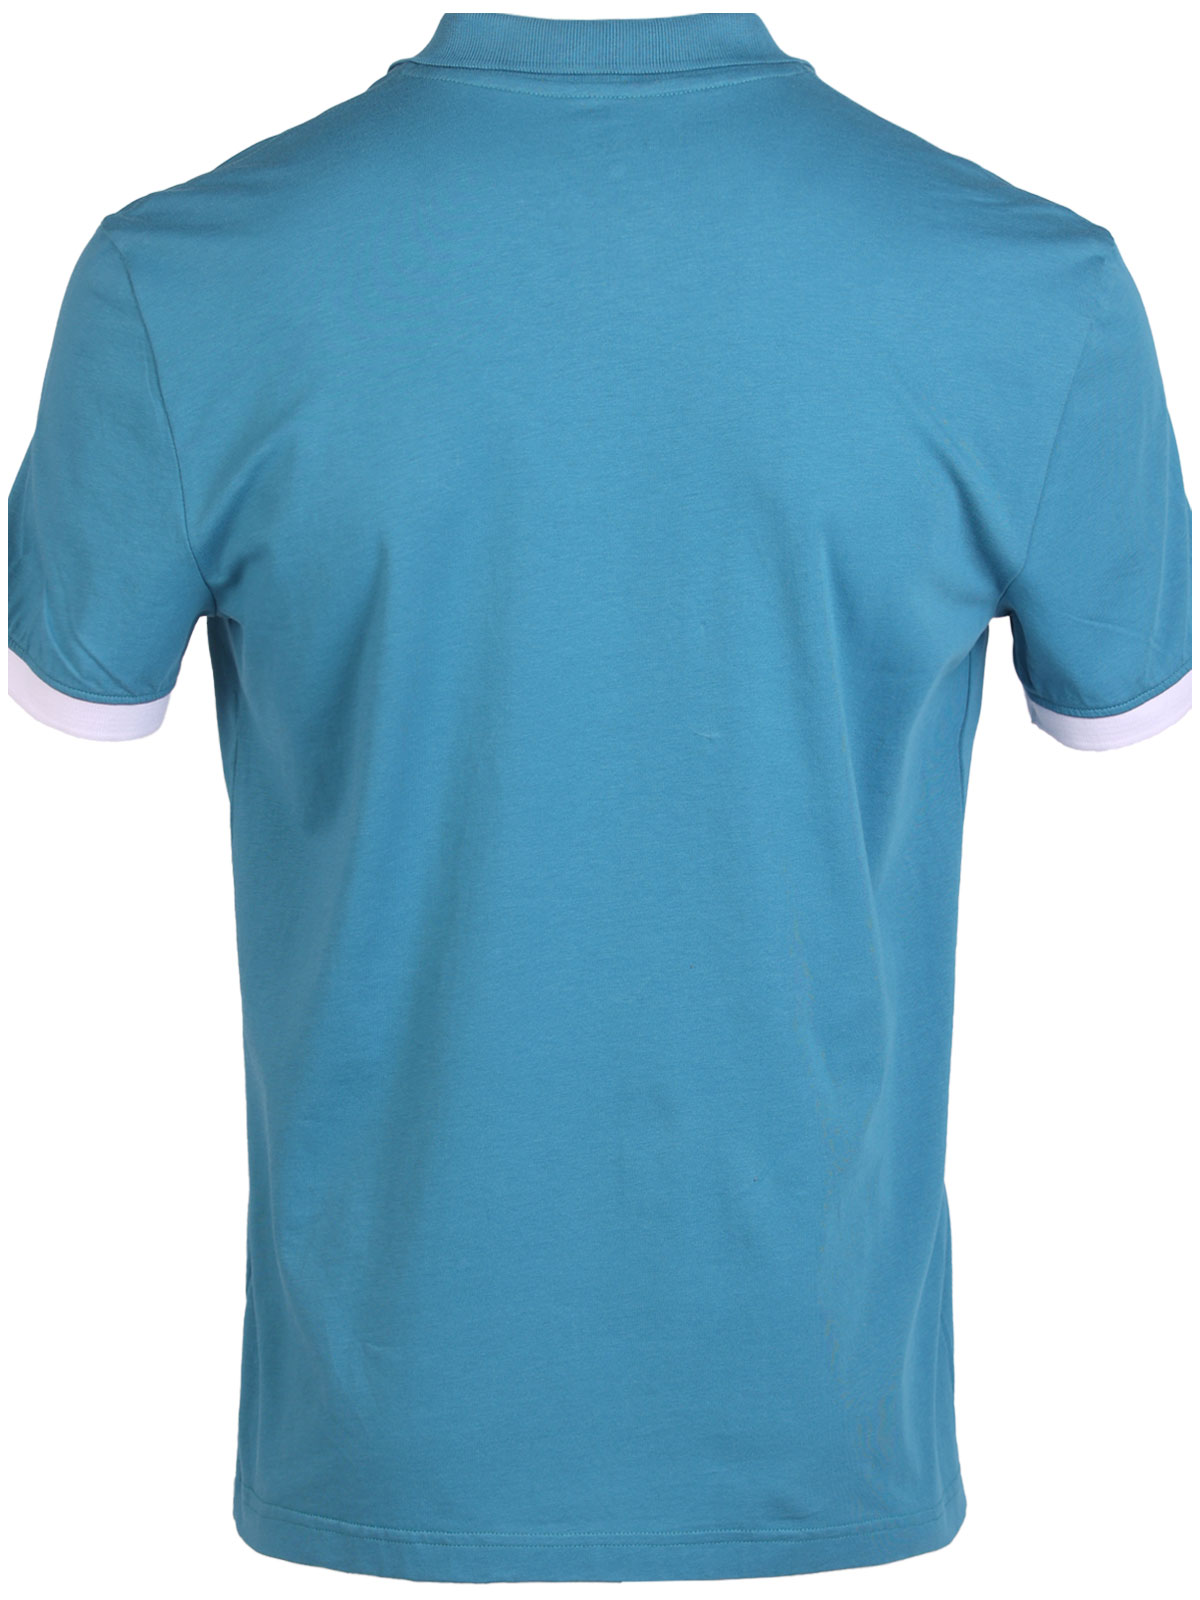 Tshirt in turquoise with a knitted coll - 94414 € 37.12 img2